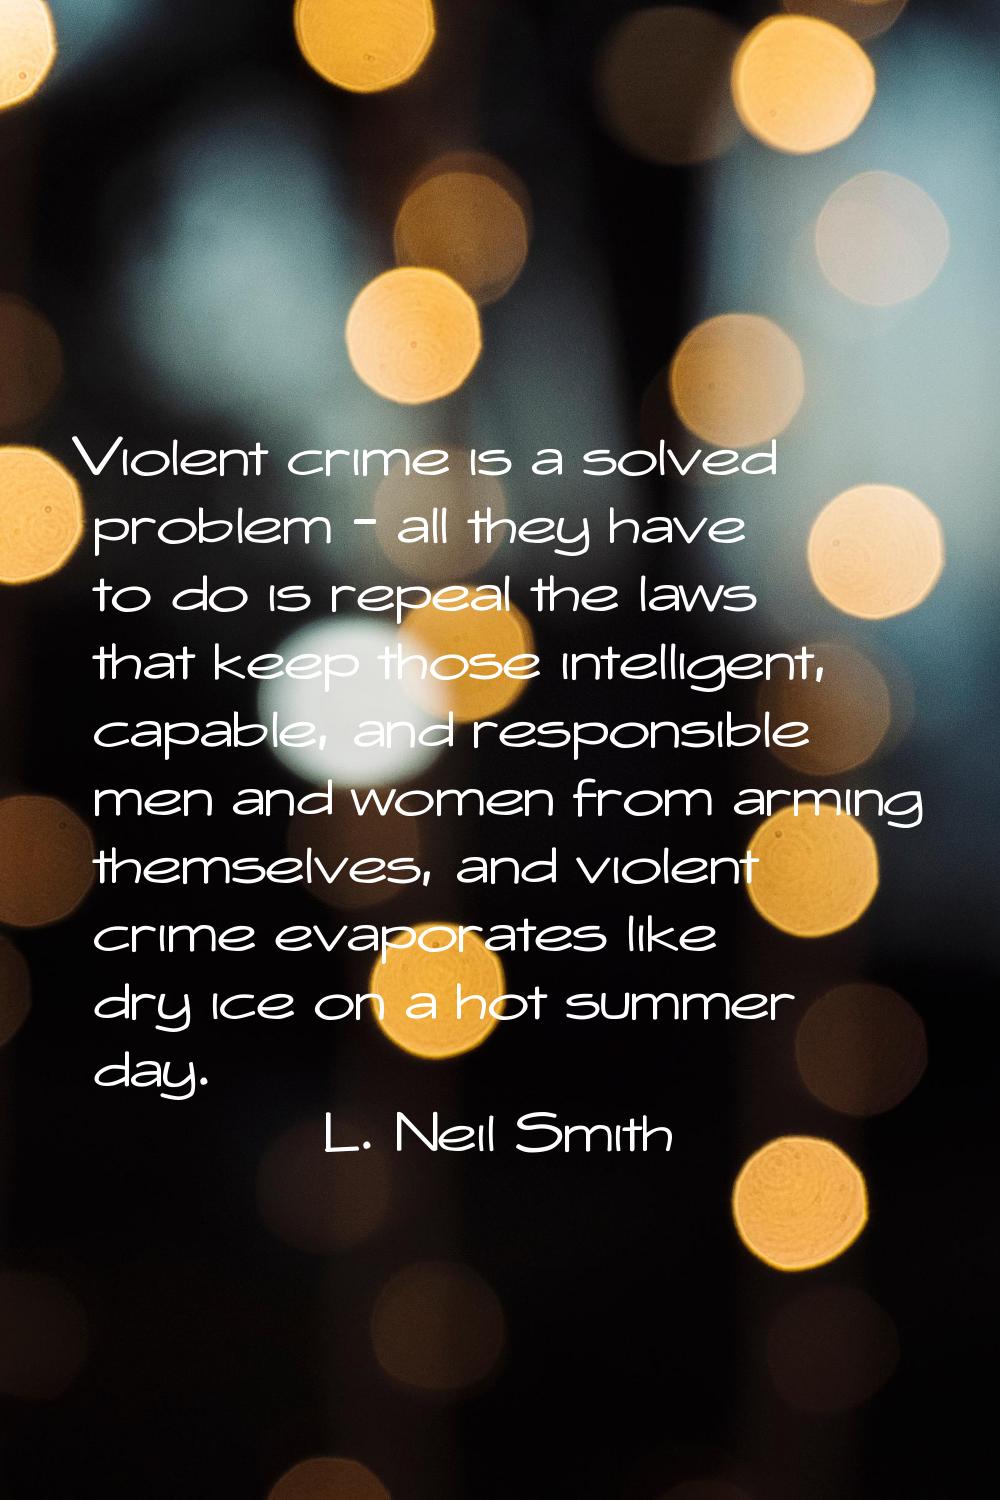 Violent crime is a solved problem - all they have to do is repeal the laws that keep those intellig